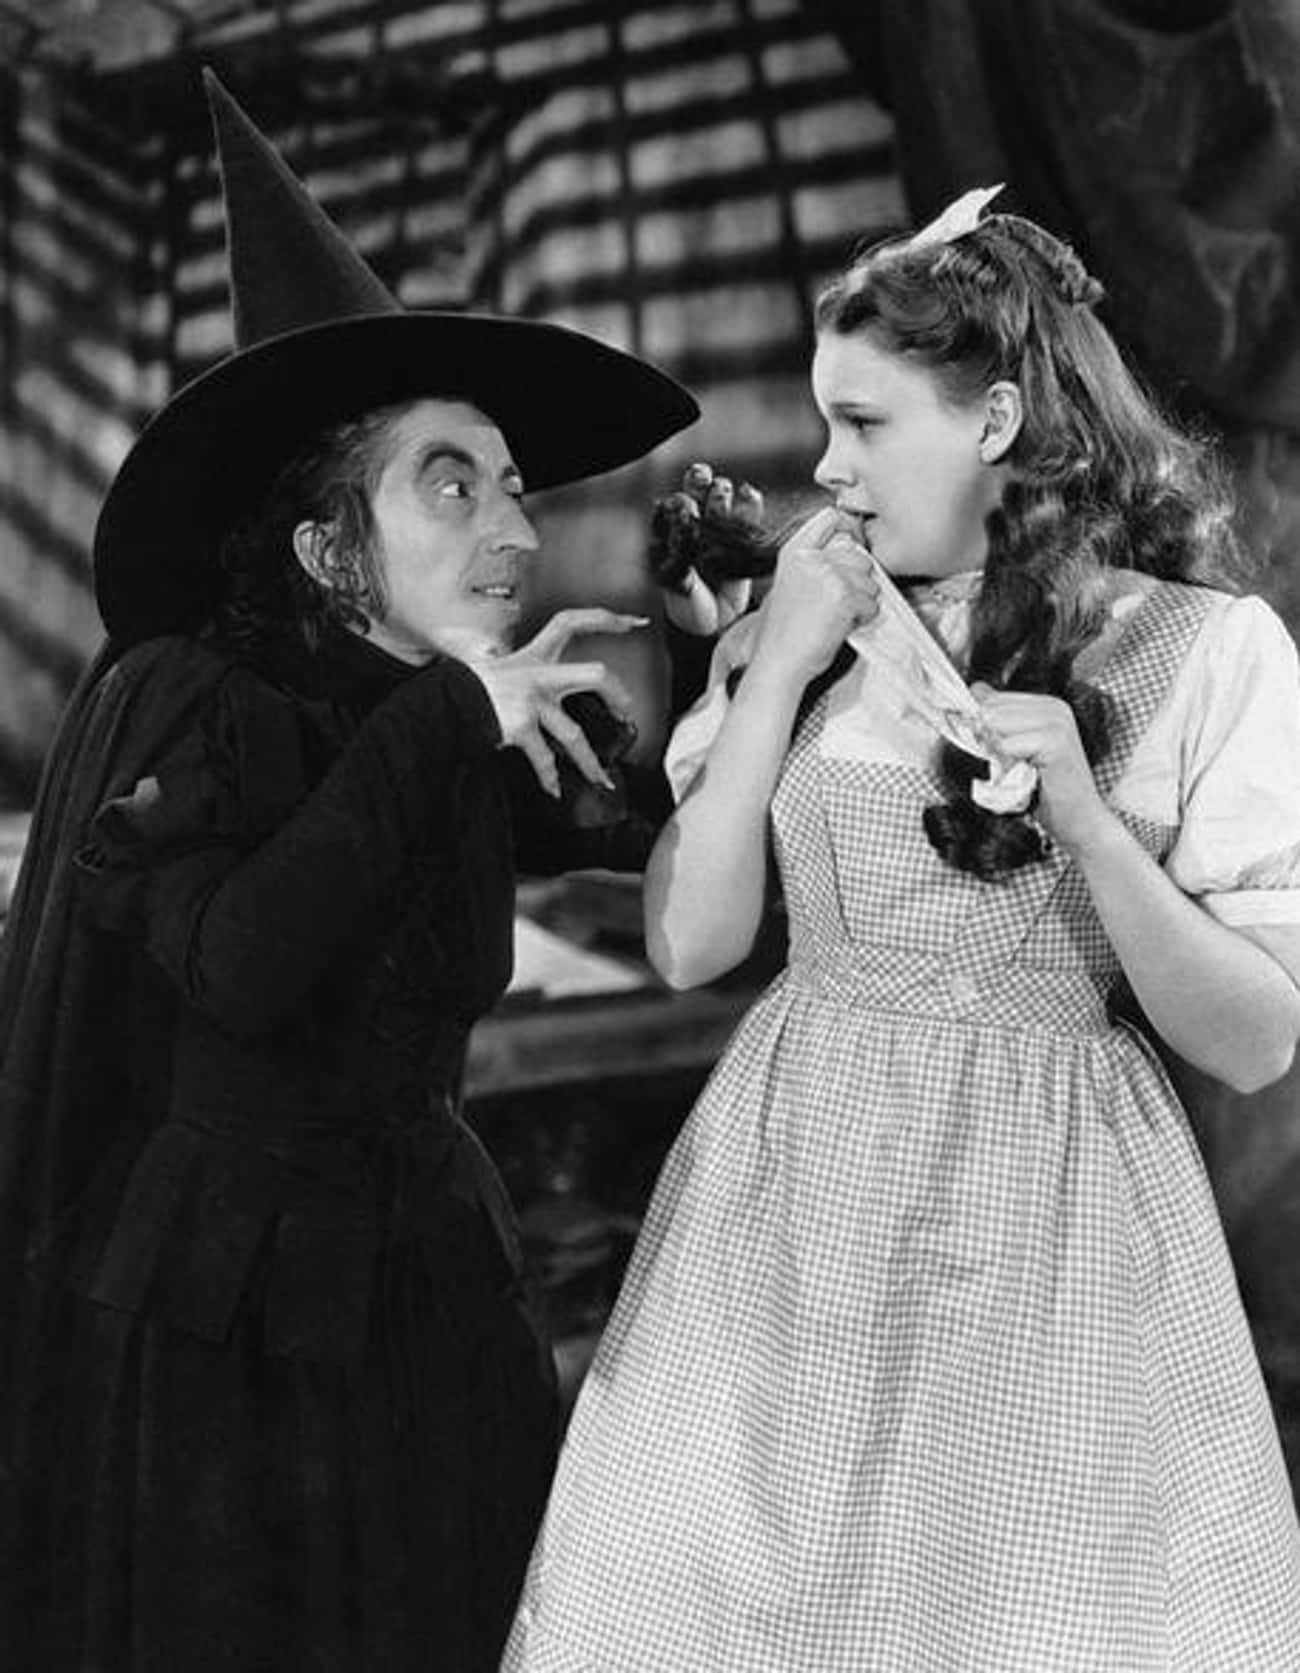 She Suffered Severe Burns While Filming 'The Wizard Of Oz'